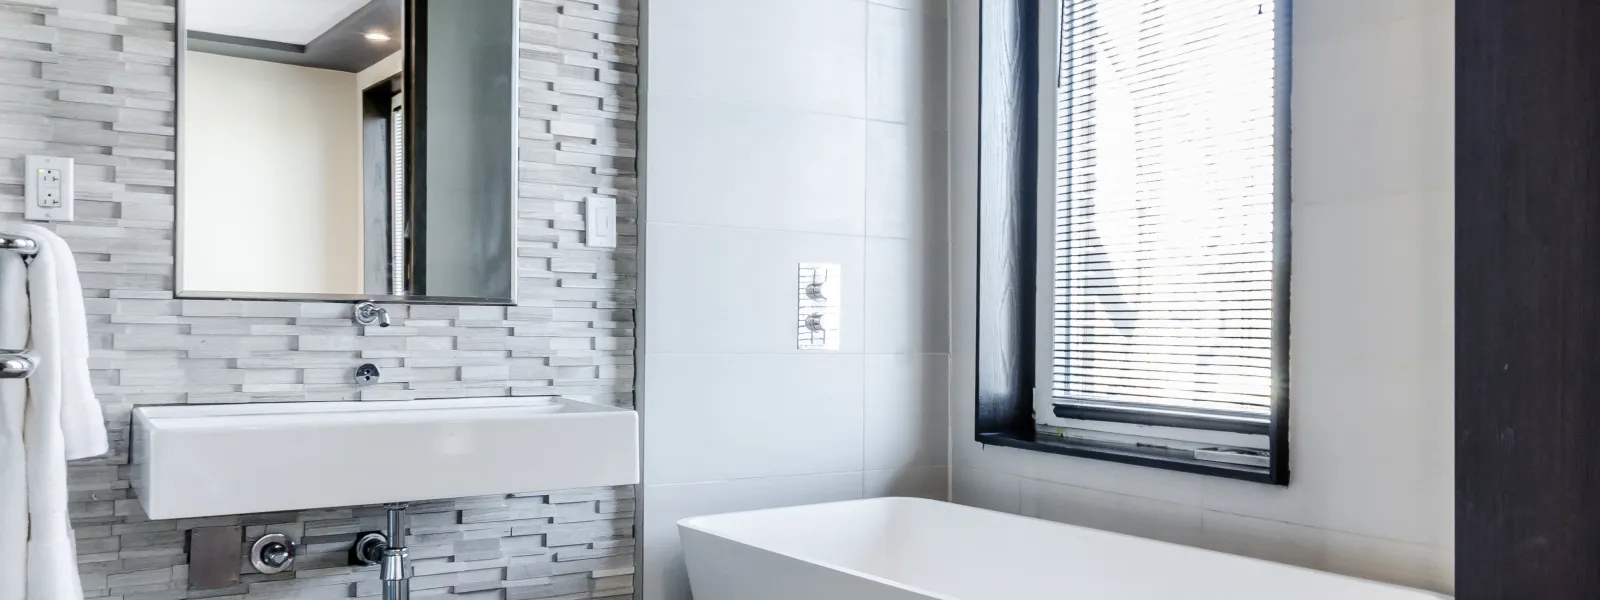 How Much Does It Cost to Remodel an Average Bathroom?